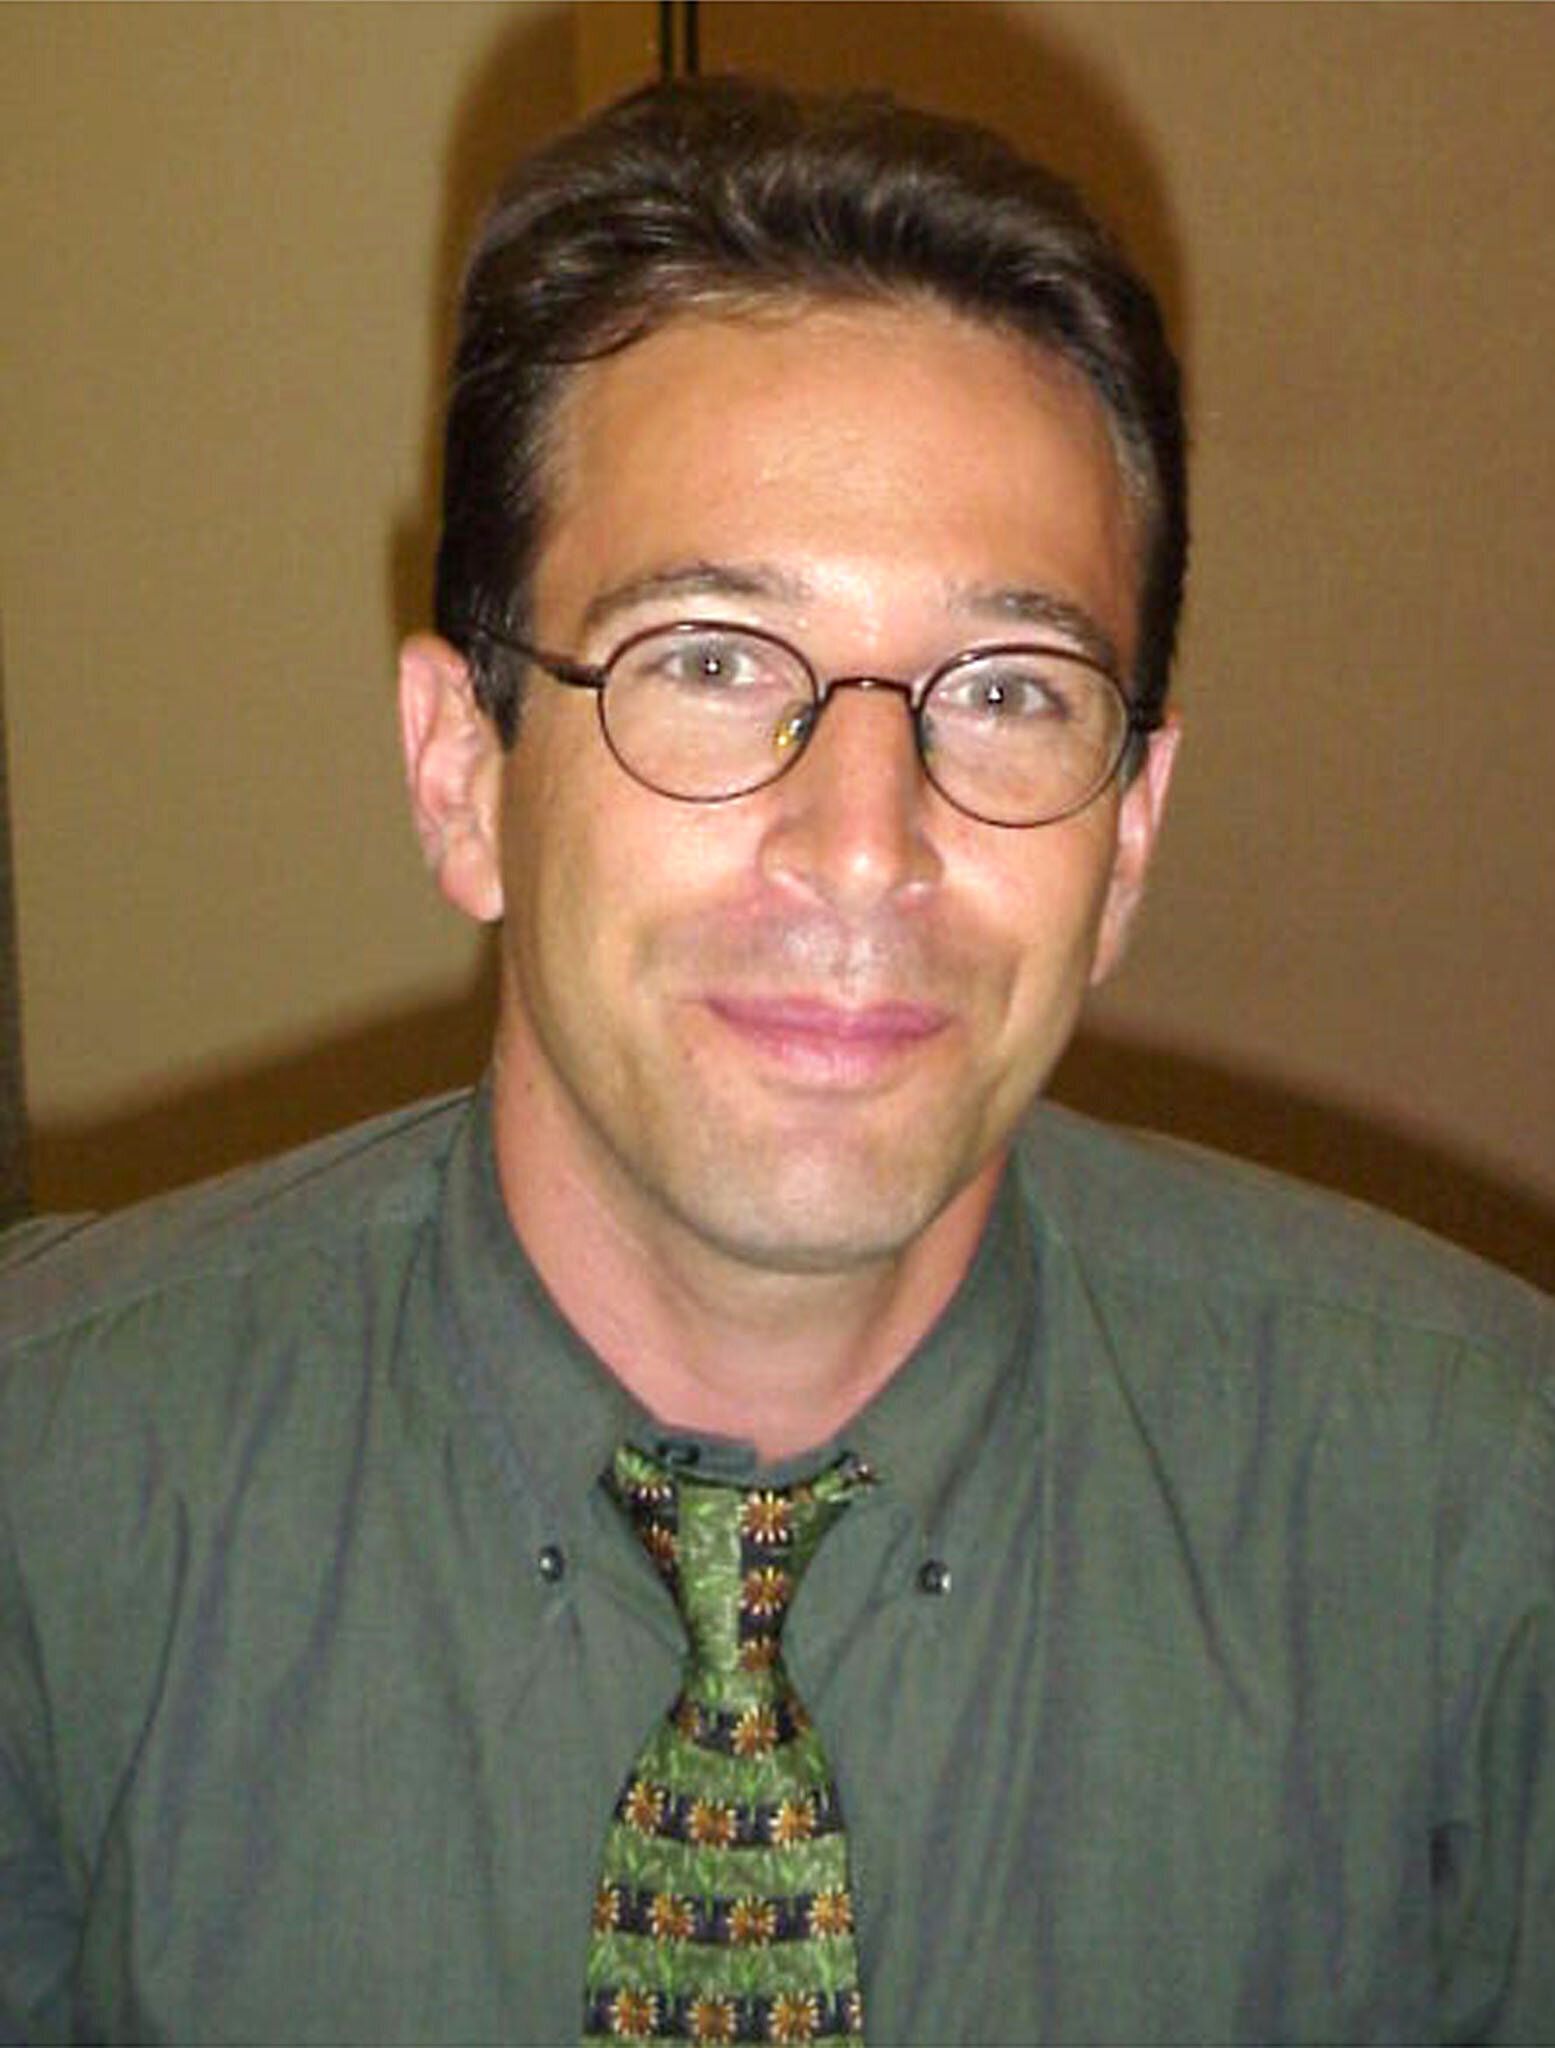 Wall Street Journal reporter Daniel Pearl, 38, was described by his family as "a gentle soul." He was murdered in Pakistan af